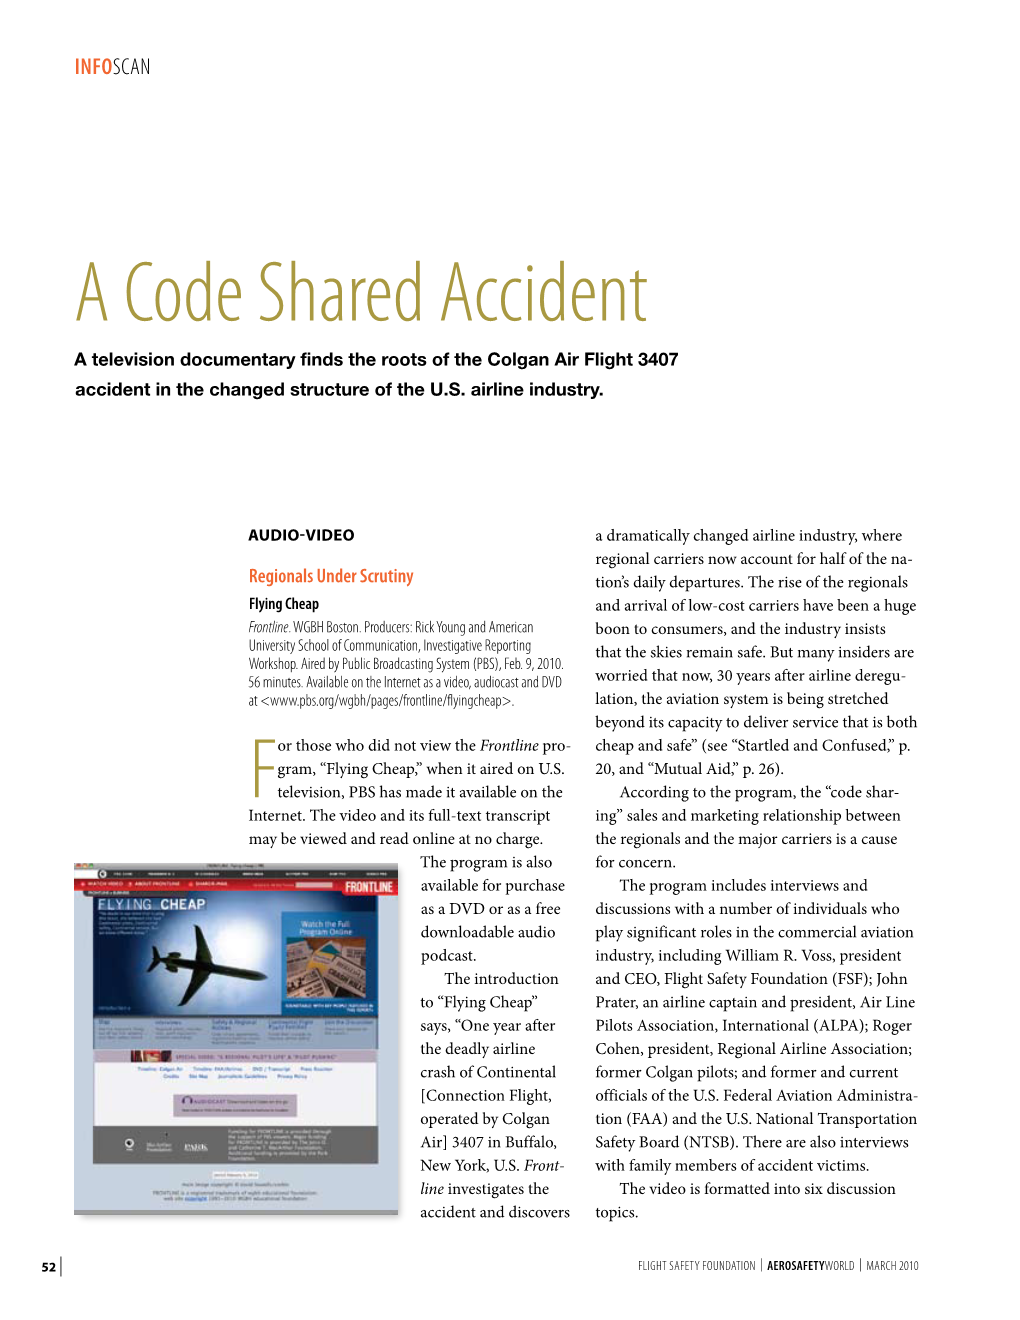 A Code Shared Accident a Television Documentary Finds the Roots of the Colgan Air Flight 3407 Accident in the Changed Structure of the U.S